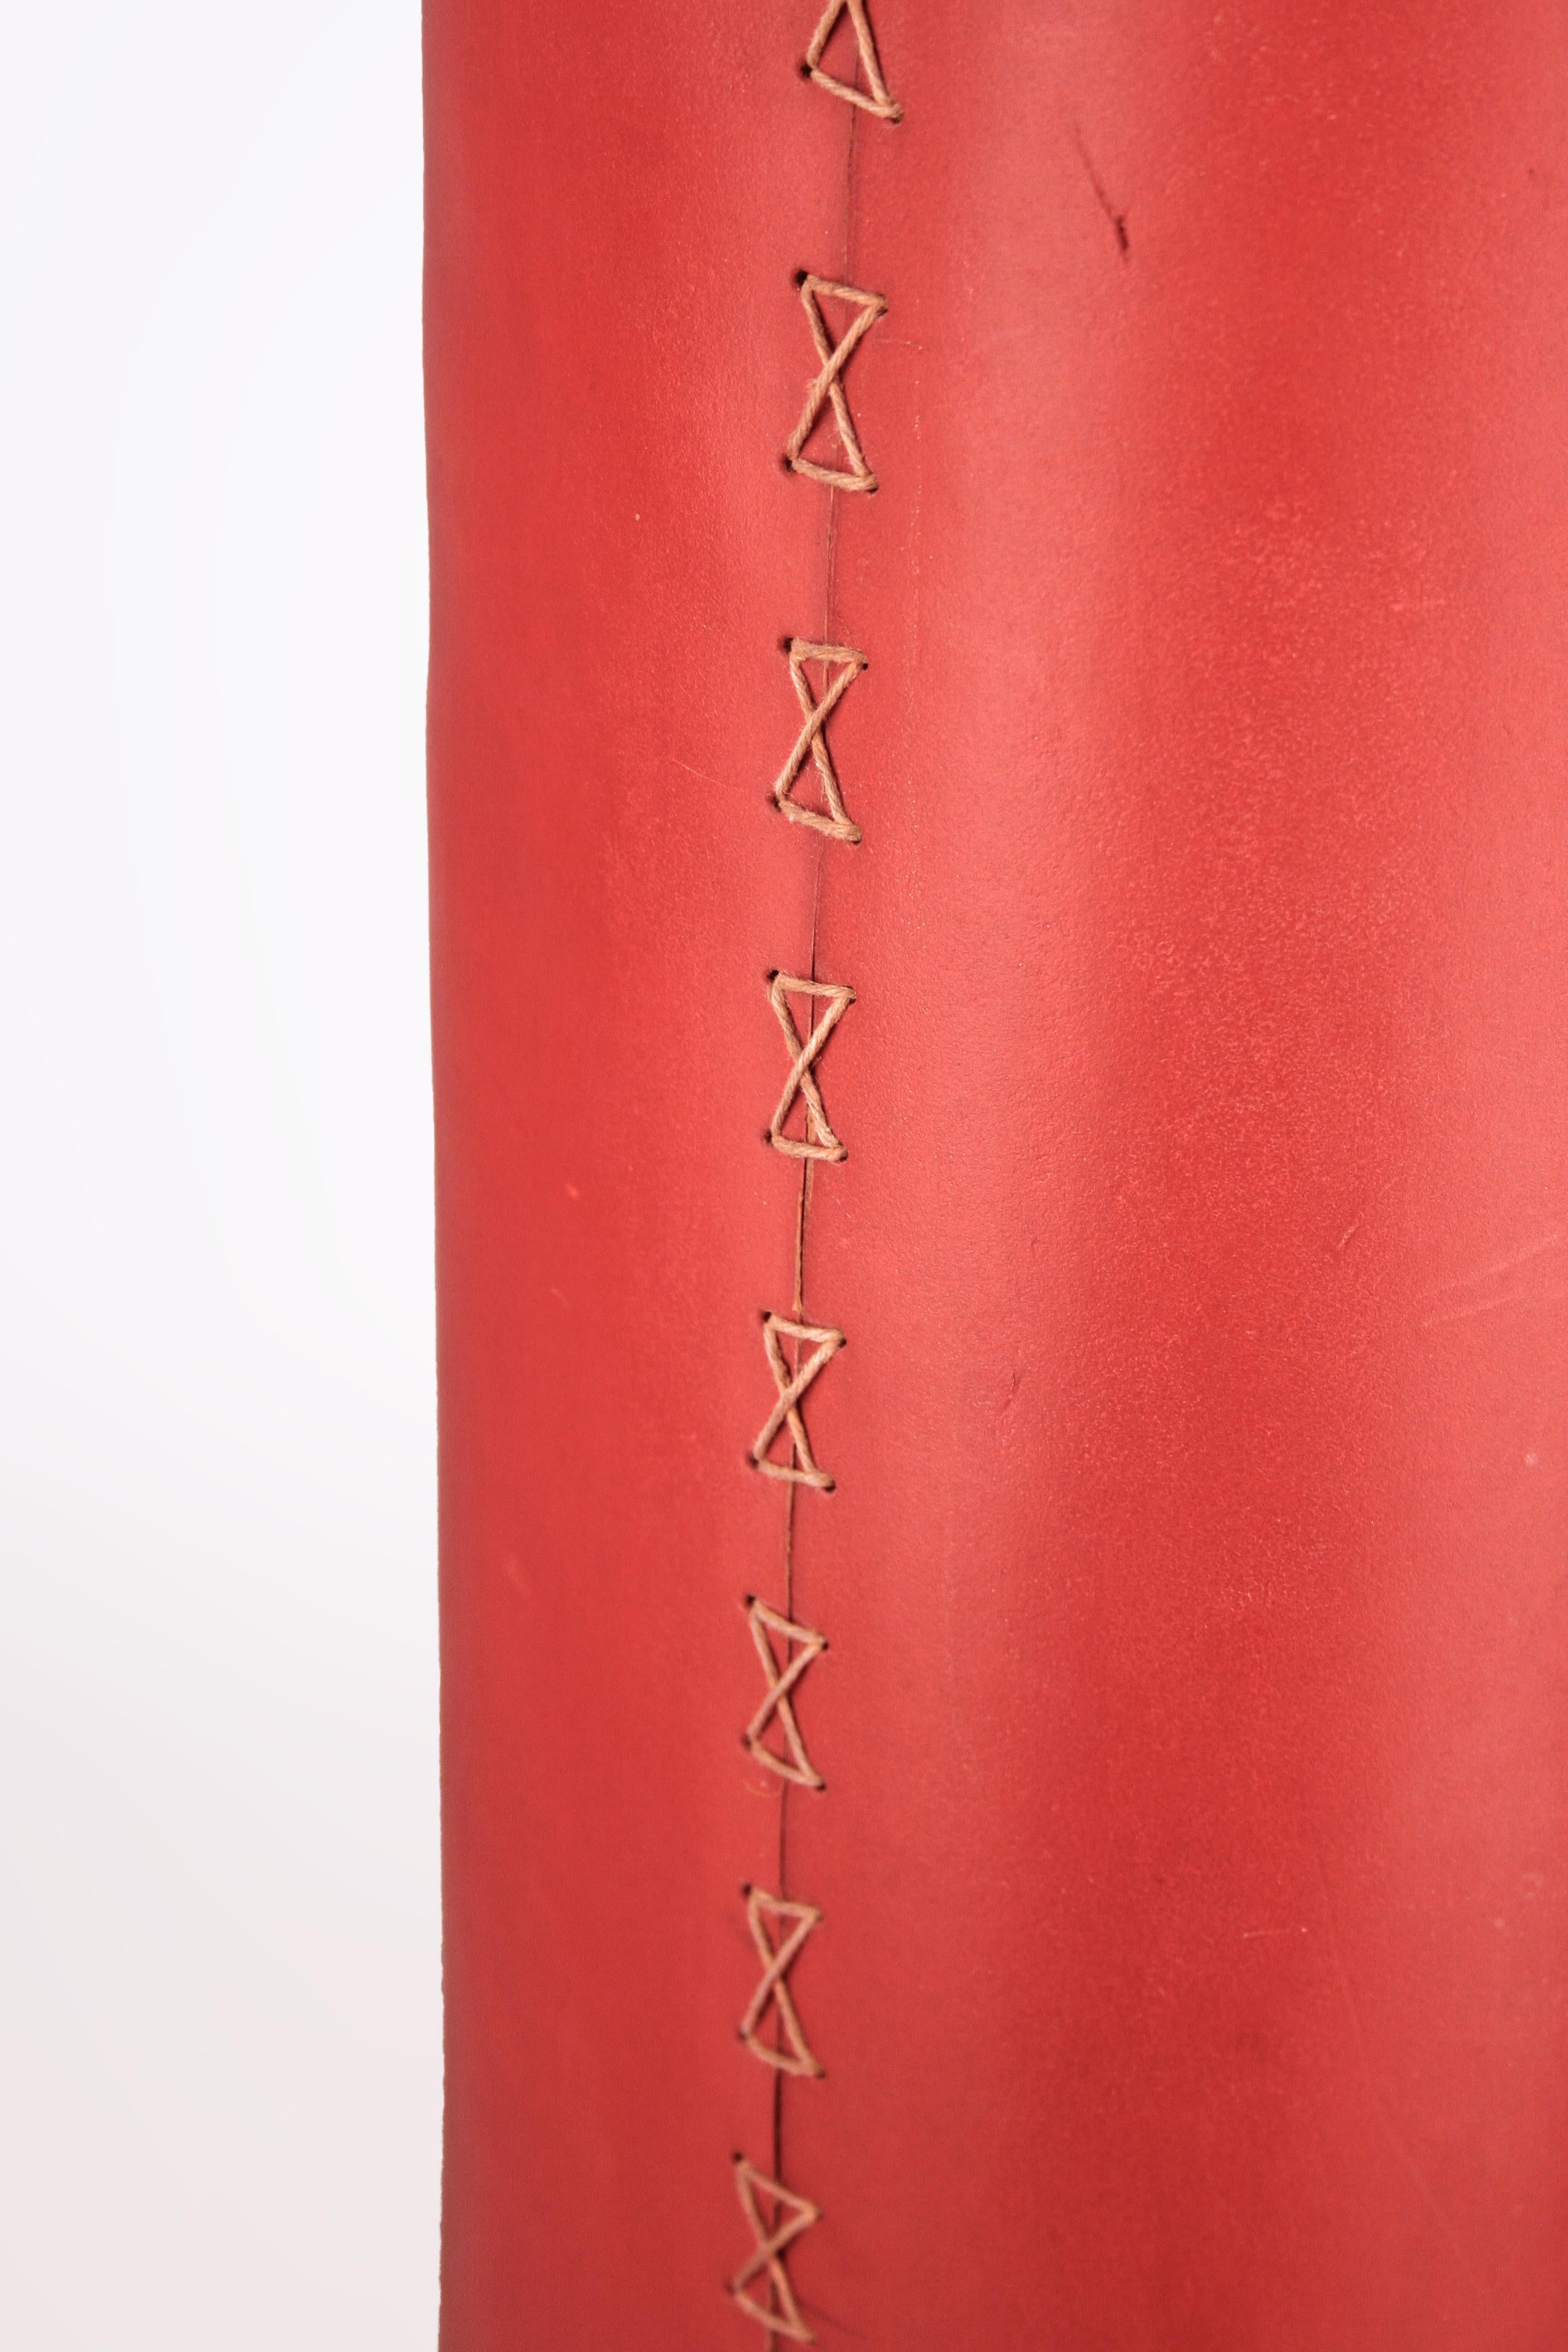 20th Century Mid-20th C. Modern French Red Leather Cylindrical Umbrella Stand by Hermès Paris For Sale